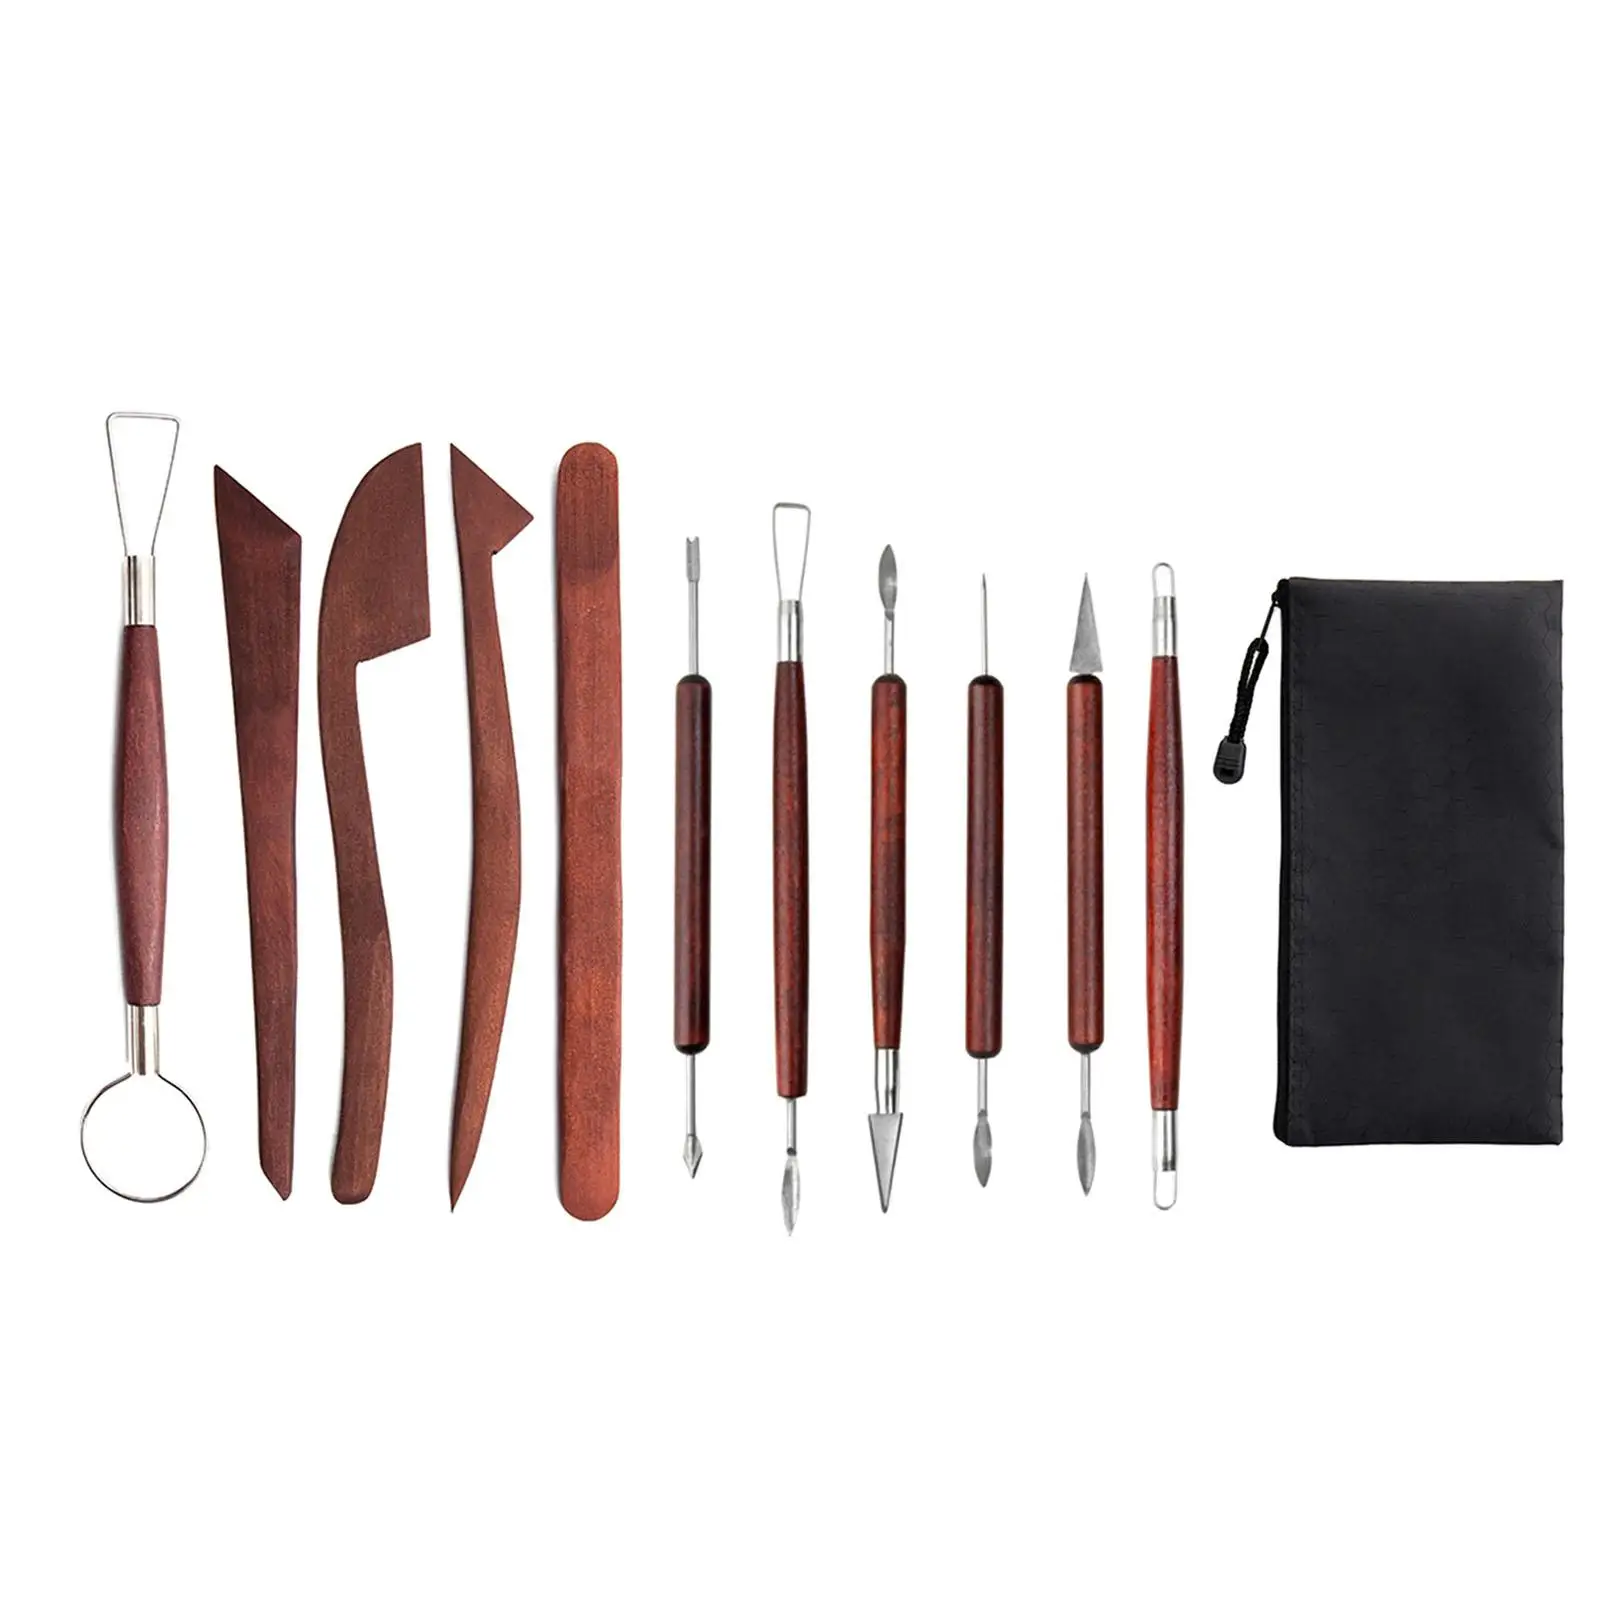 12x Clay Sculpting Tools Smooth Wooden Handle Double Ended Modeling Carrying Bag Pottery Carving Tool Set for Schools and Home